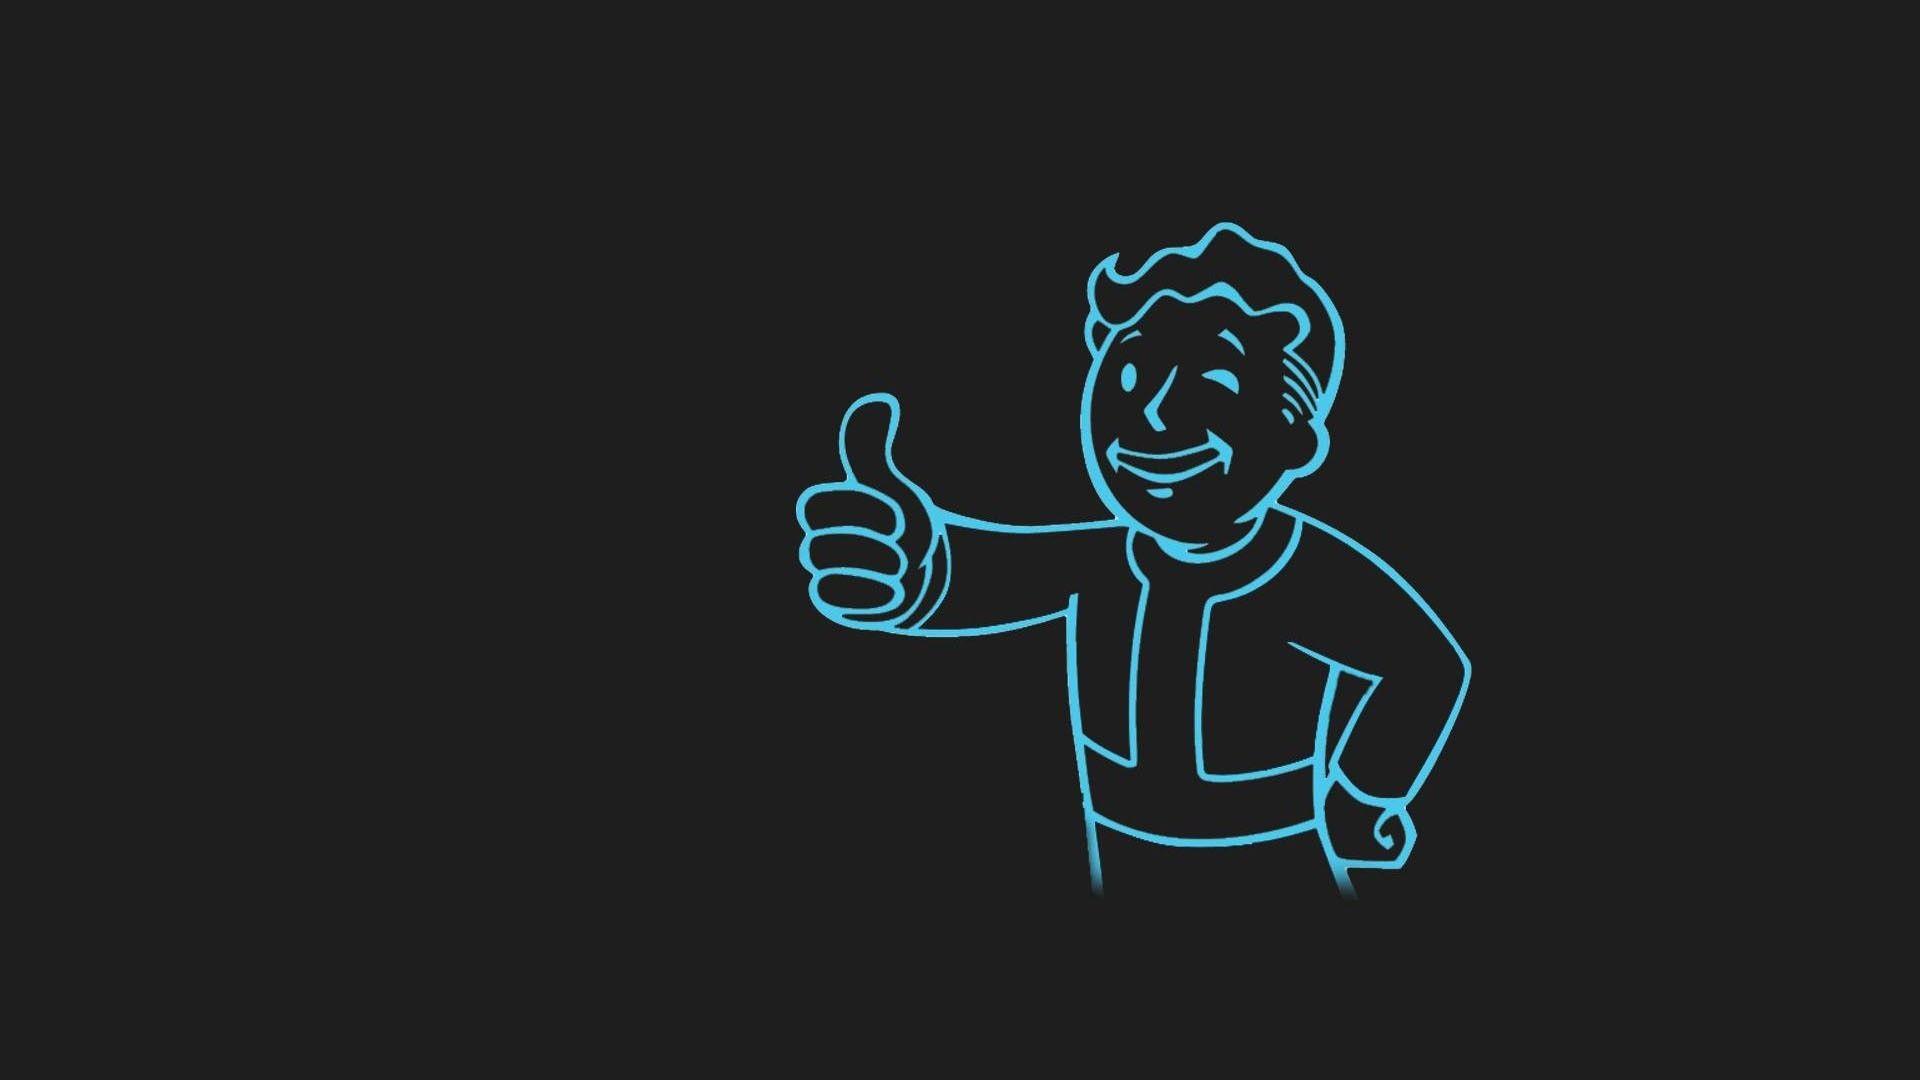 Fallout Vault Boy wallpapers ·① Download free amazing High